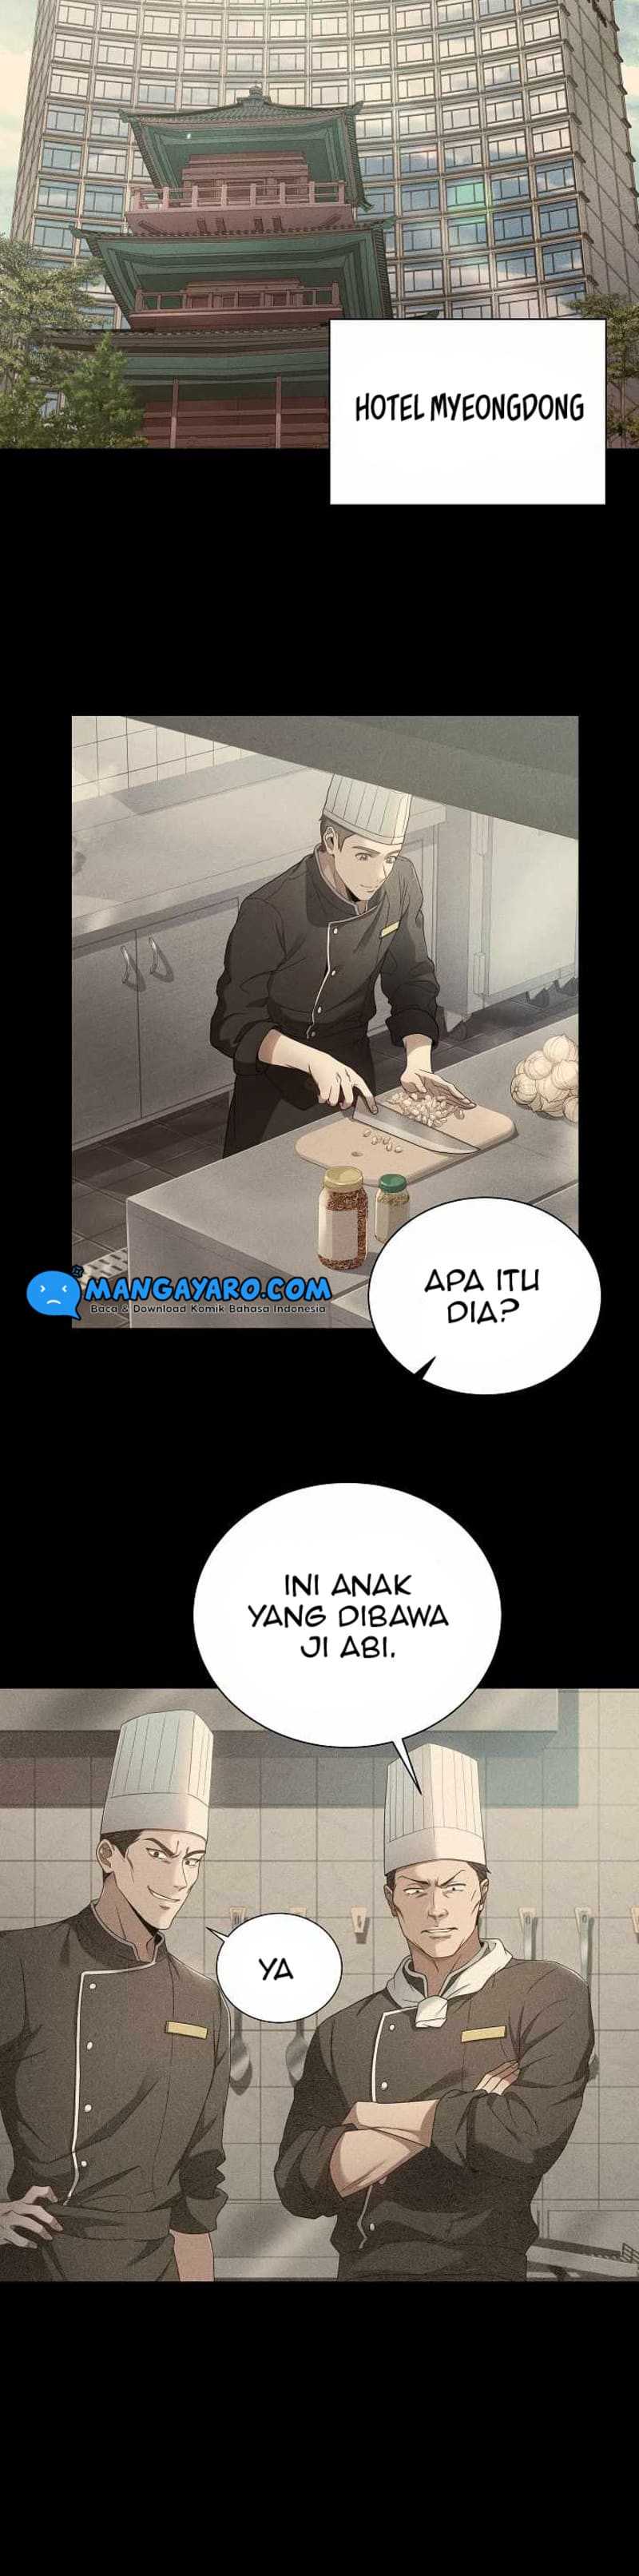 Youngest Chef From the 3rd Rate Hotel Chapter 02